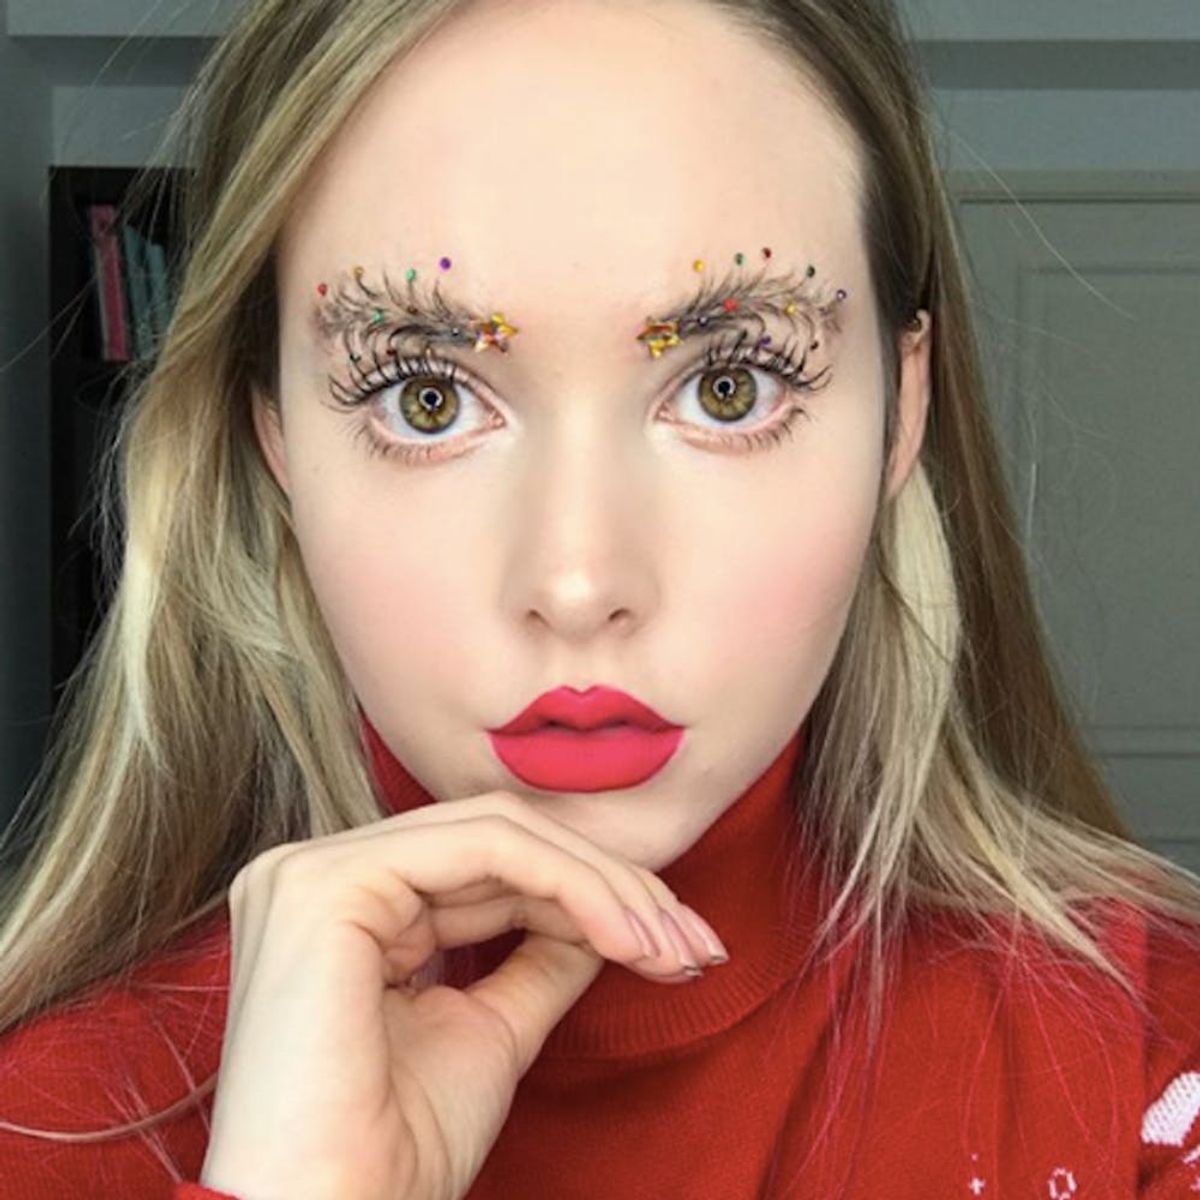 Christmas Tree Brows Are the Festive Beauty Trend You Didn’t Know You Needed